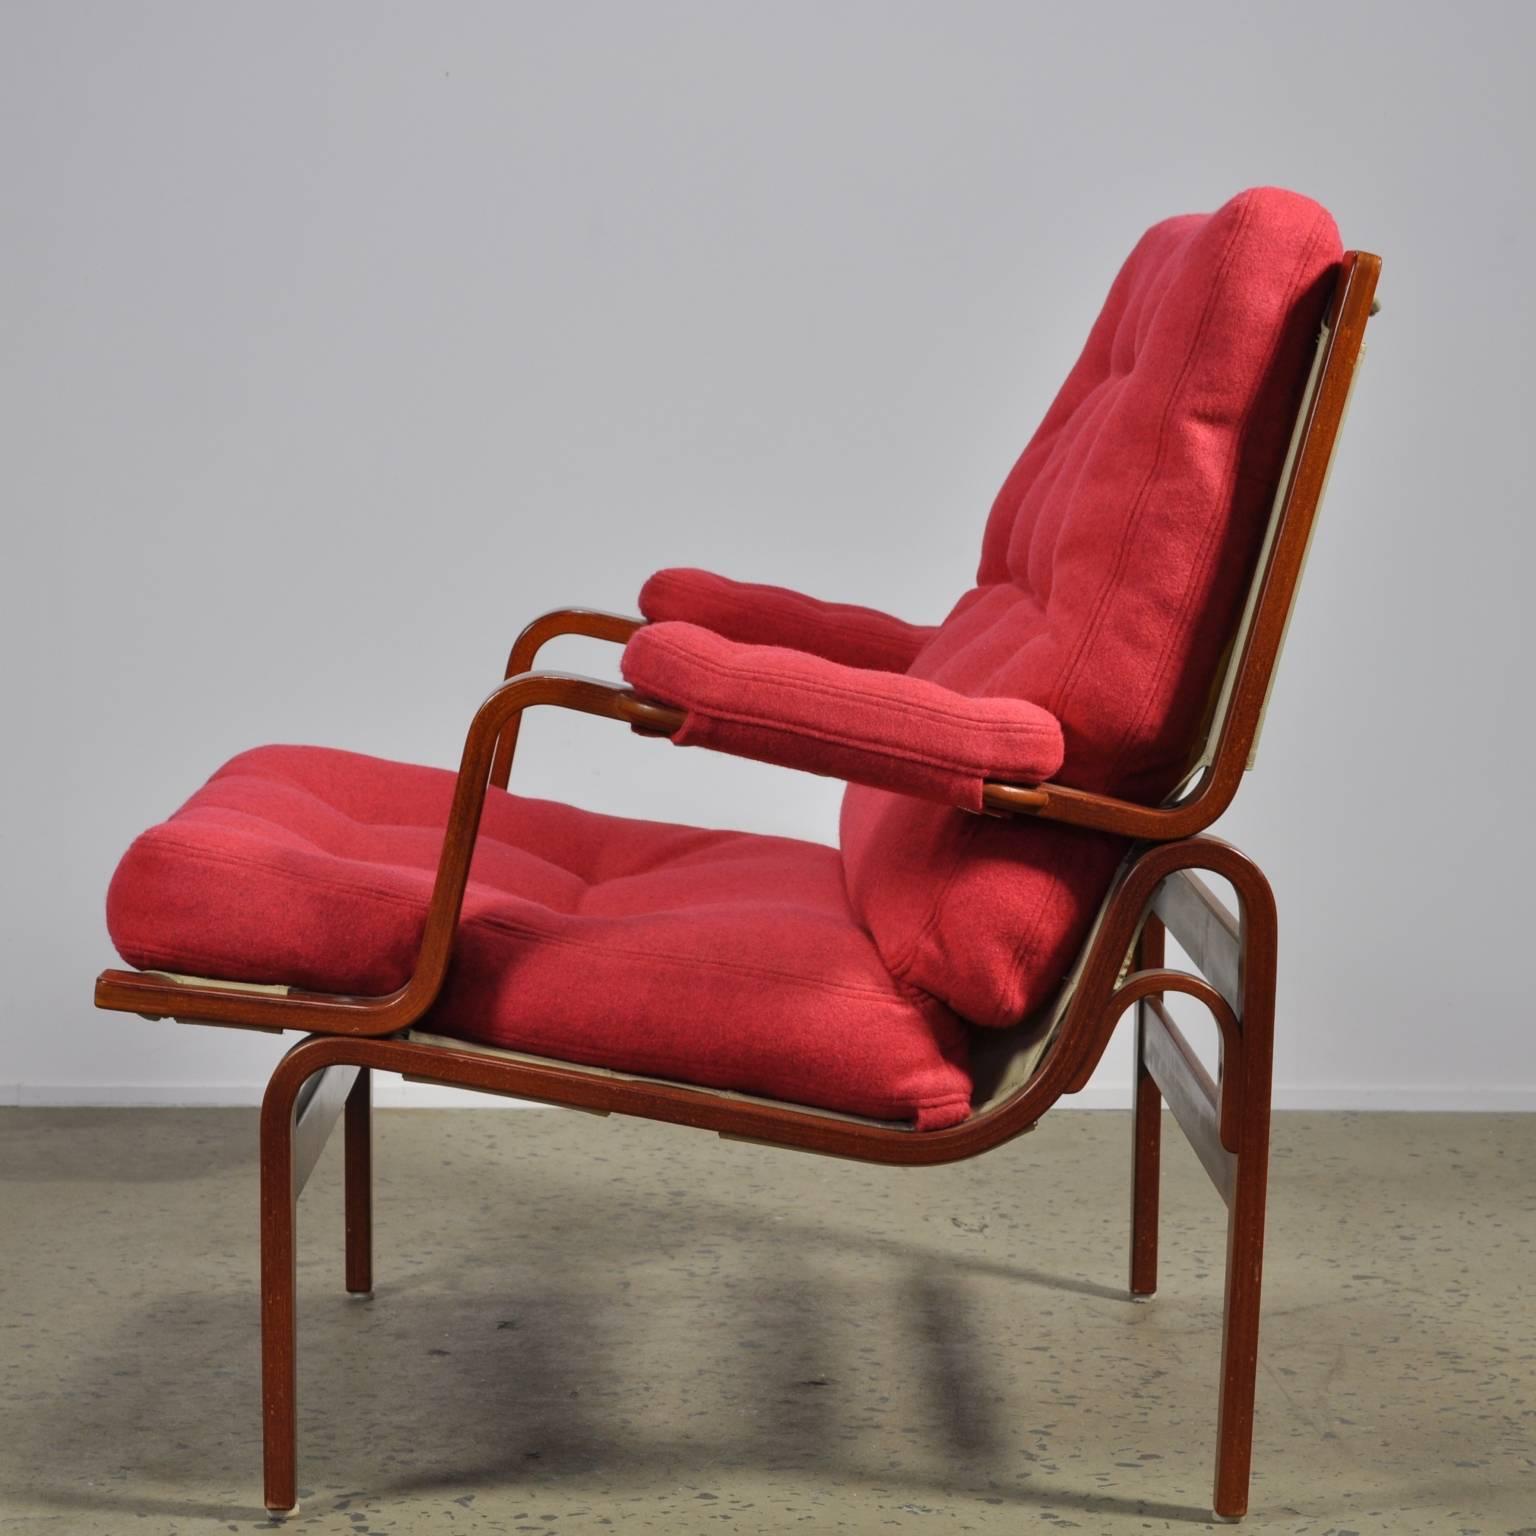 Fully restored example of the Classic Ingrid chair. This original DUX stamped item has been reupholstered in red Maharam Divina melange 531 felt fabric.

A sturdy wide design. The ingrid uses a angled bentwood frame and deep generous seat